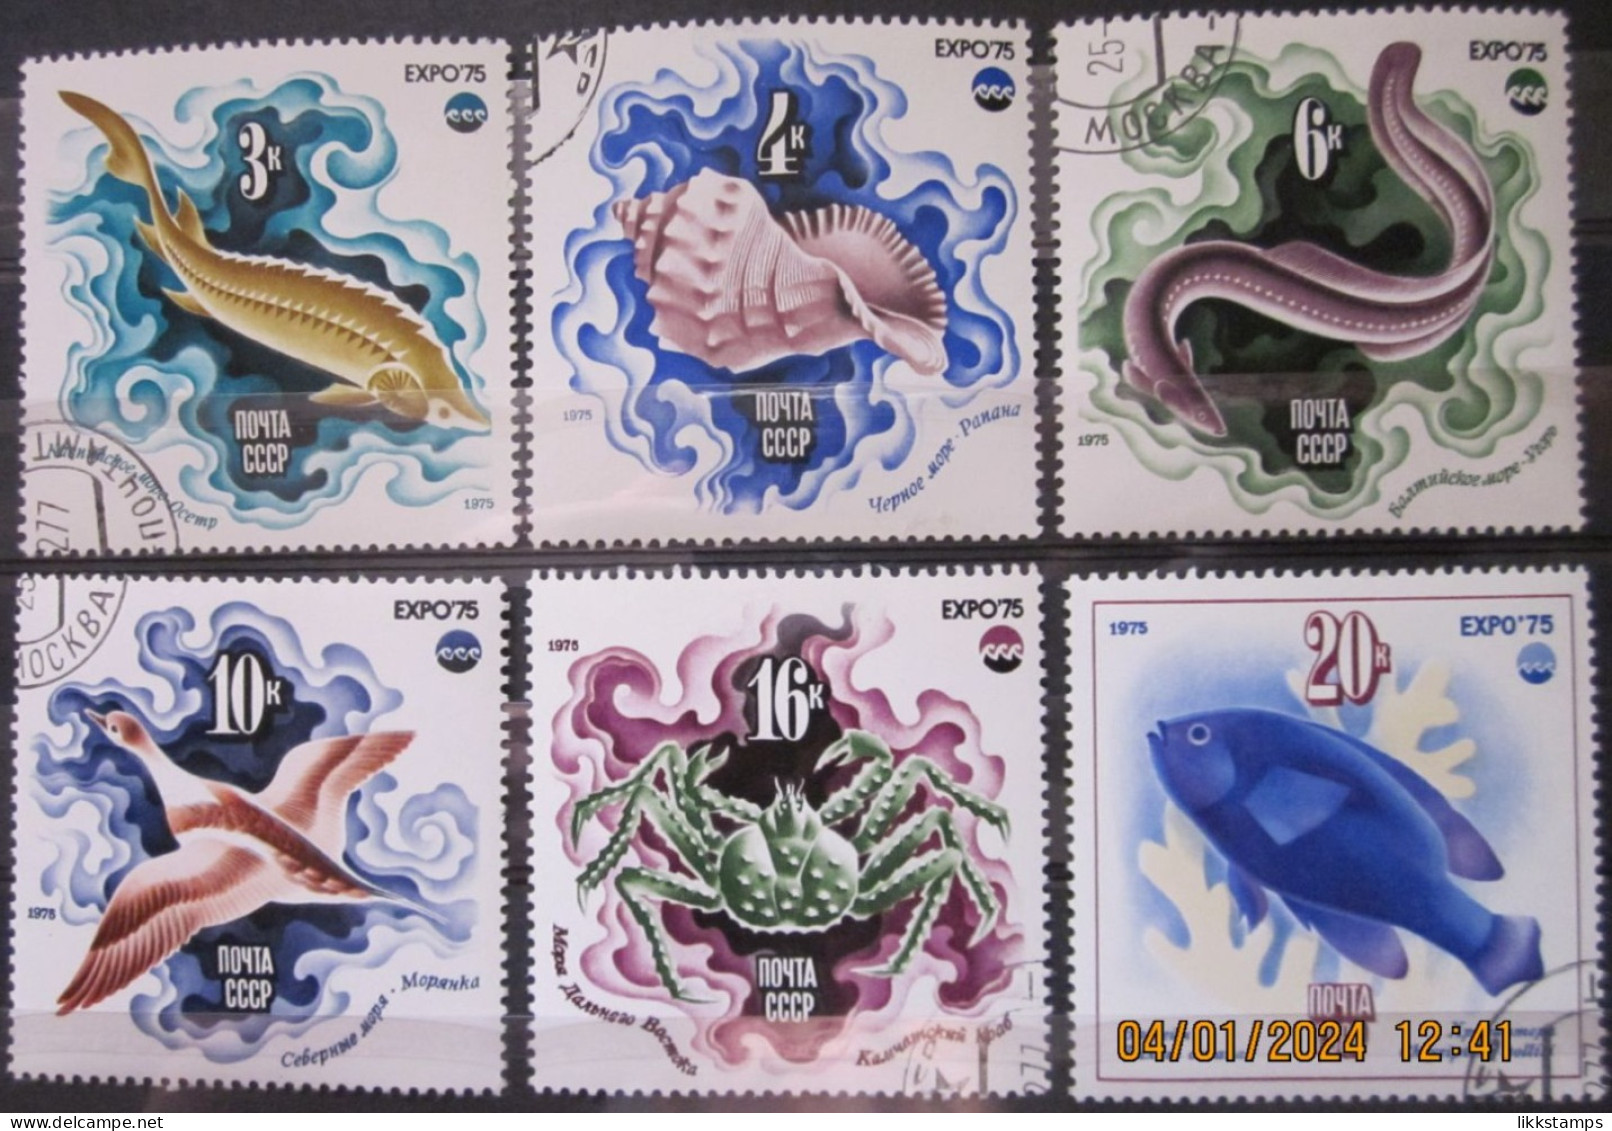 RUSSIA ~ 1975 ~ S.G. NUMBERS 4415 - 4420. ~ MARINE LIFE. ~ VFU #03581 - Used Stamps